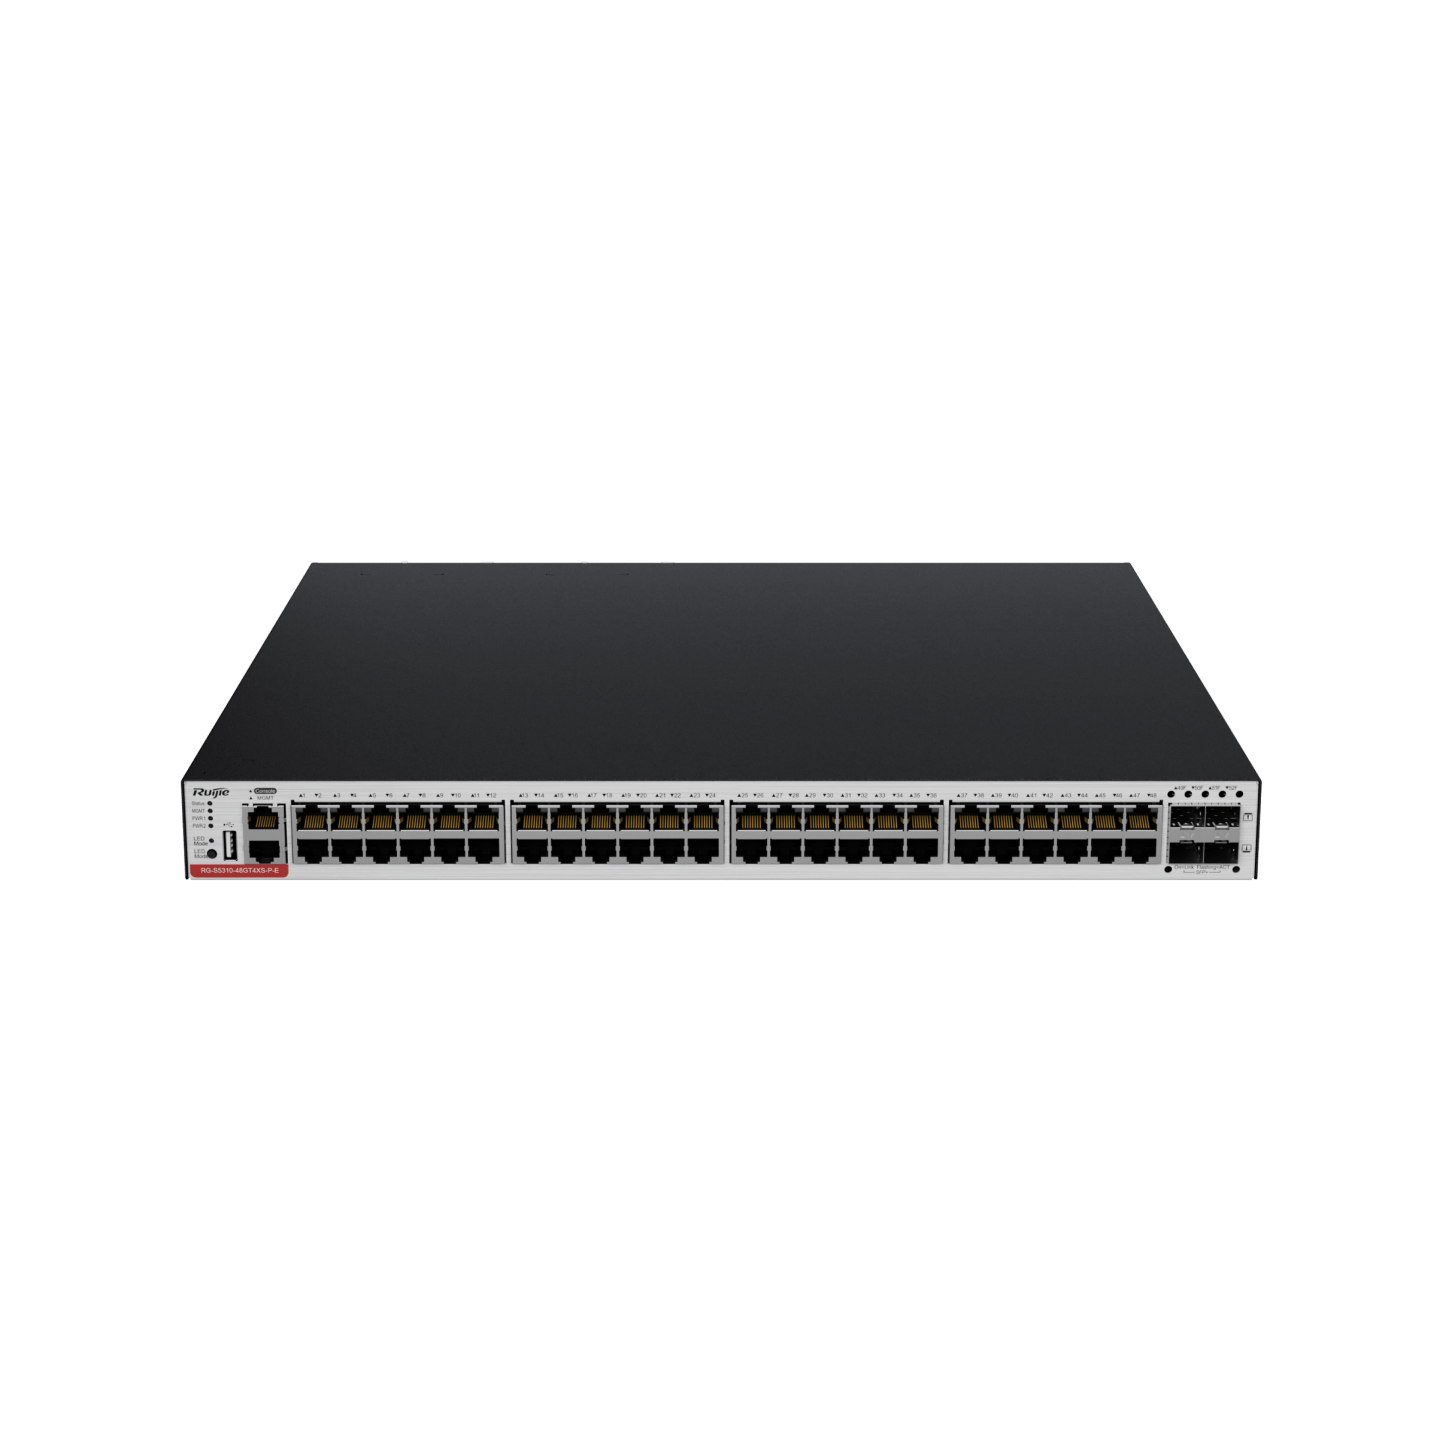 RG-CS83-48GT4XS-PD 48-Port GE Electrical Layer 3 Managed Access Switch with PoE+, Four 10G Uplink Ports